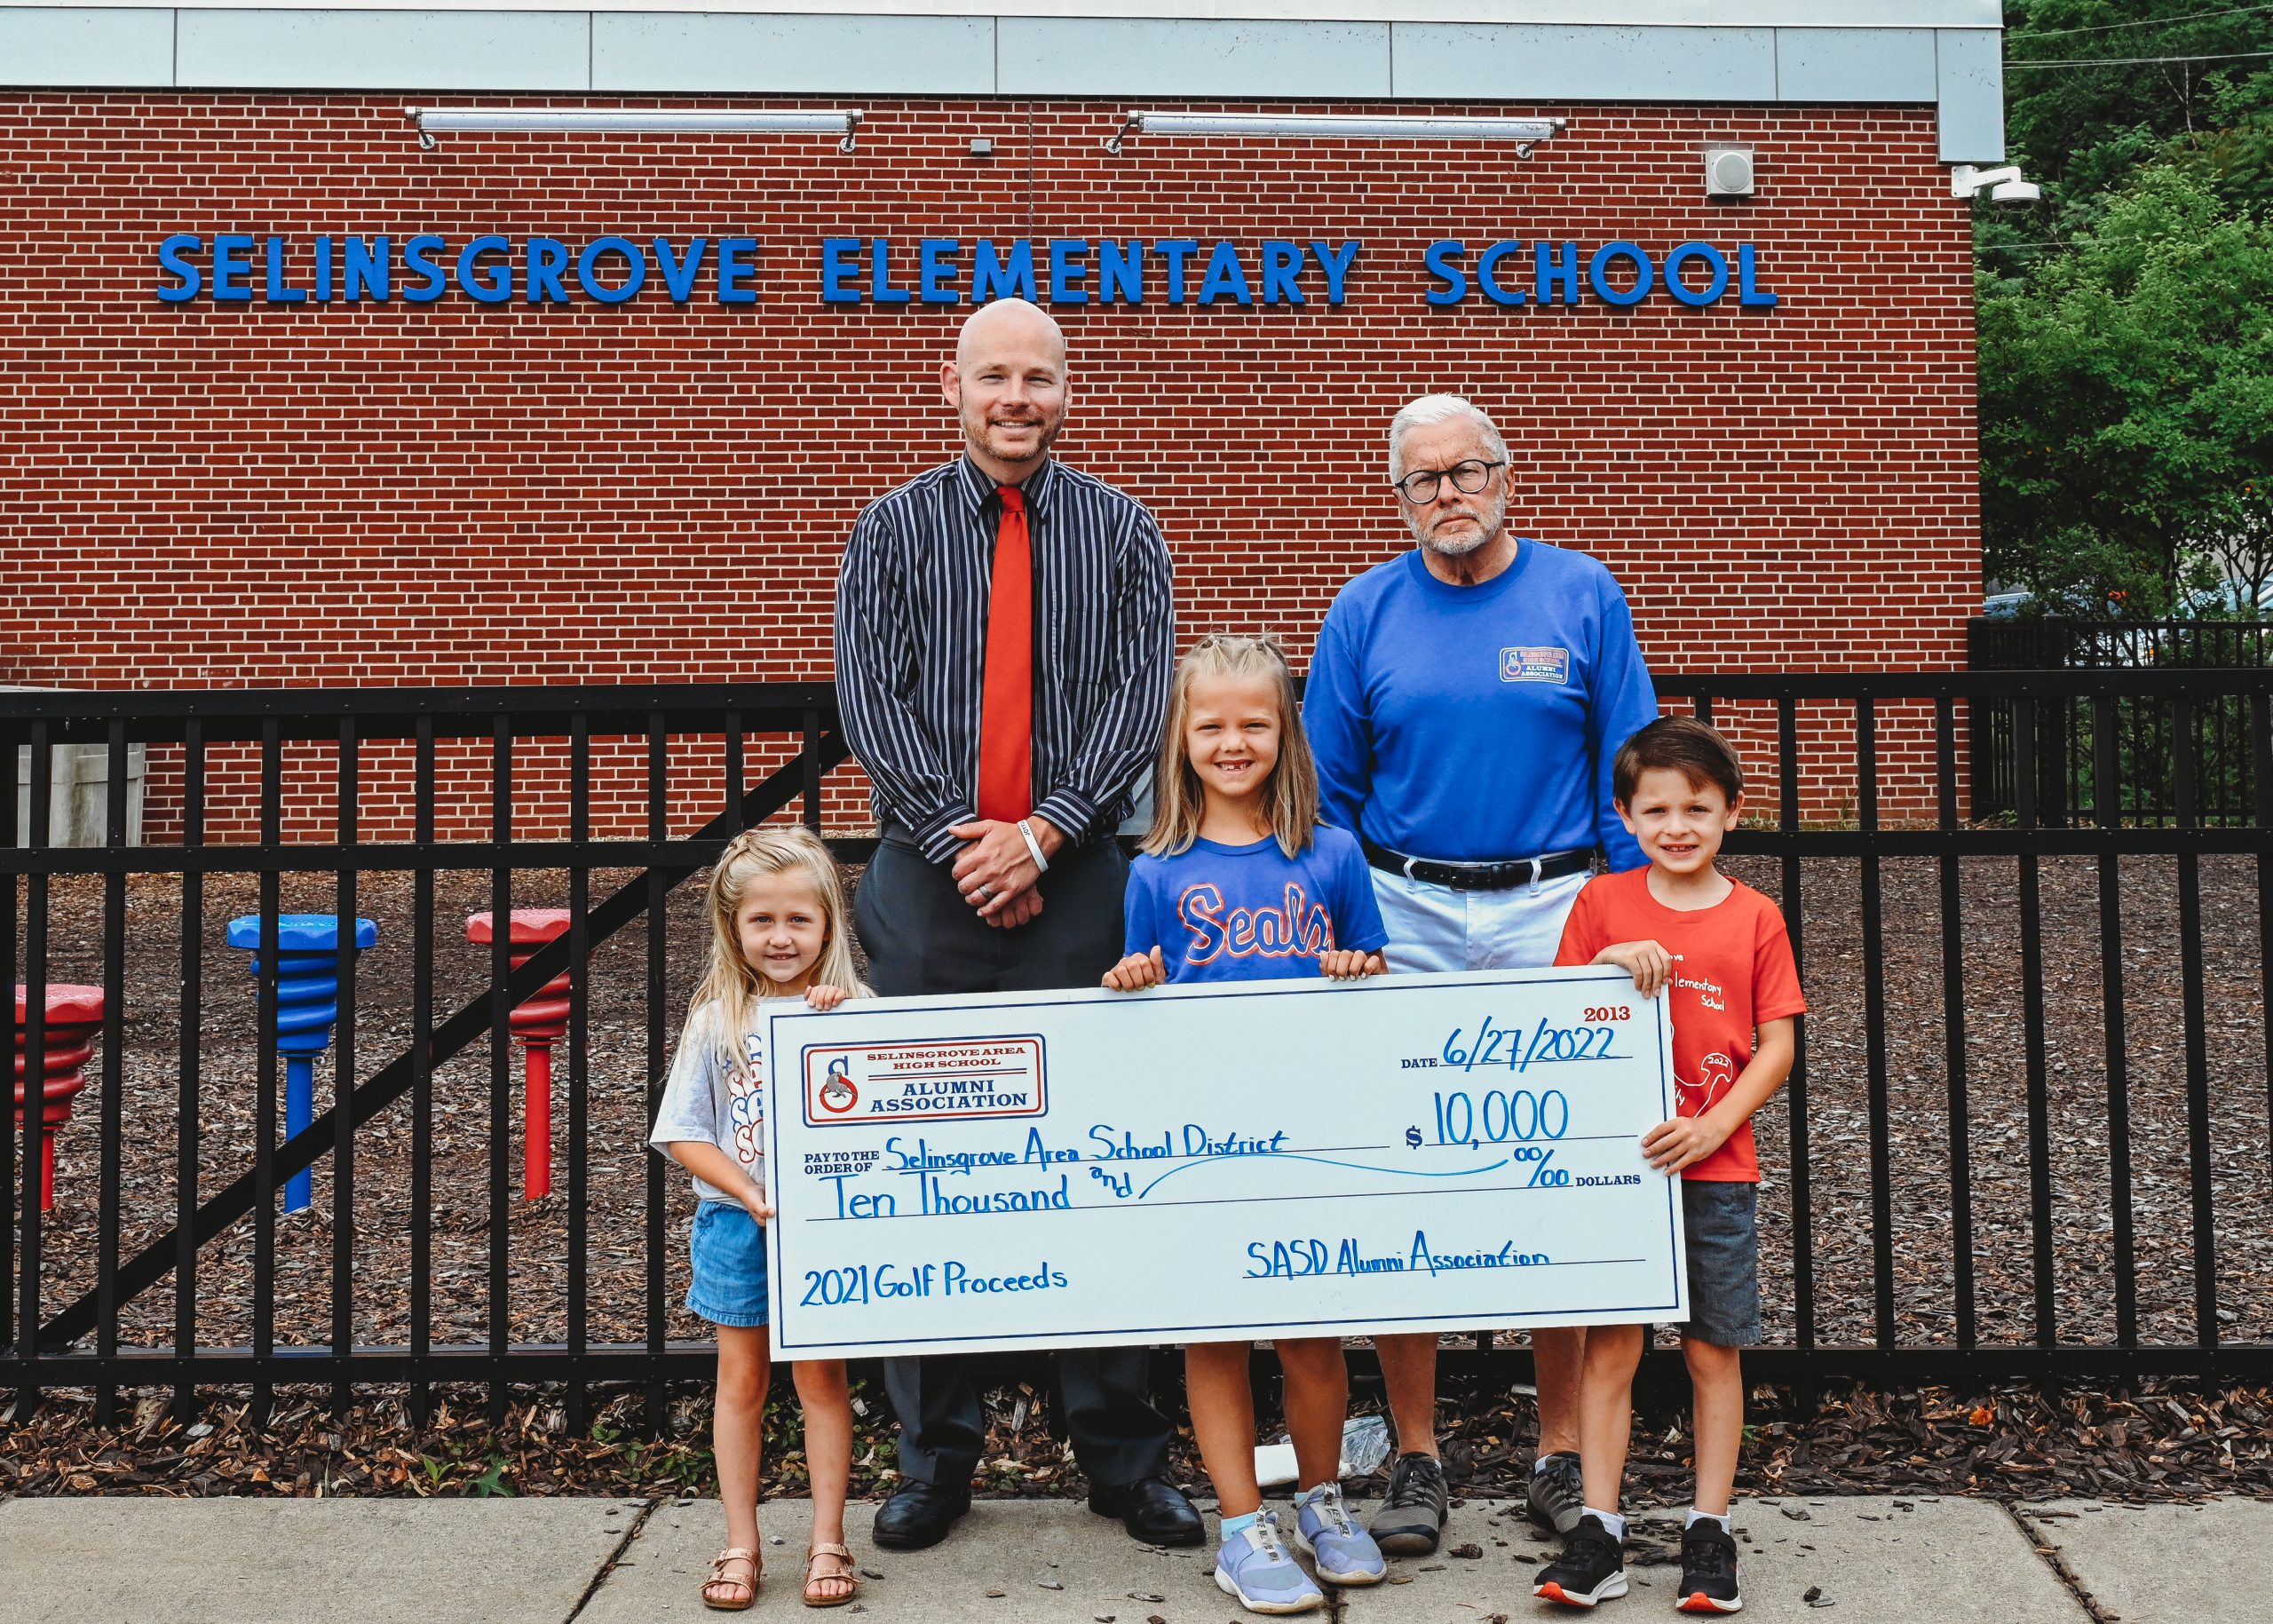 SASD Alumni Association presents check to SASD for $10,000 from the proceeds of the 2021 golf tournament. Back row (left to right) – Mr. Damian Gessel (SAES Principal), Mr. Eric Rowe (SAHS Alumni Association President) Front row (left to right) – Cora Lerch (Kindergarten), Aubrie Hauck (2nd Grade), and Greyson Carr (1st Grade)